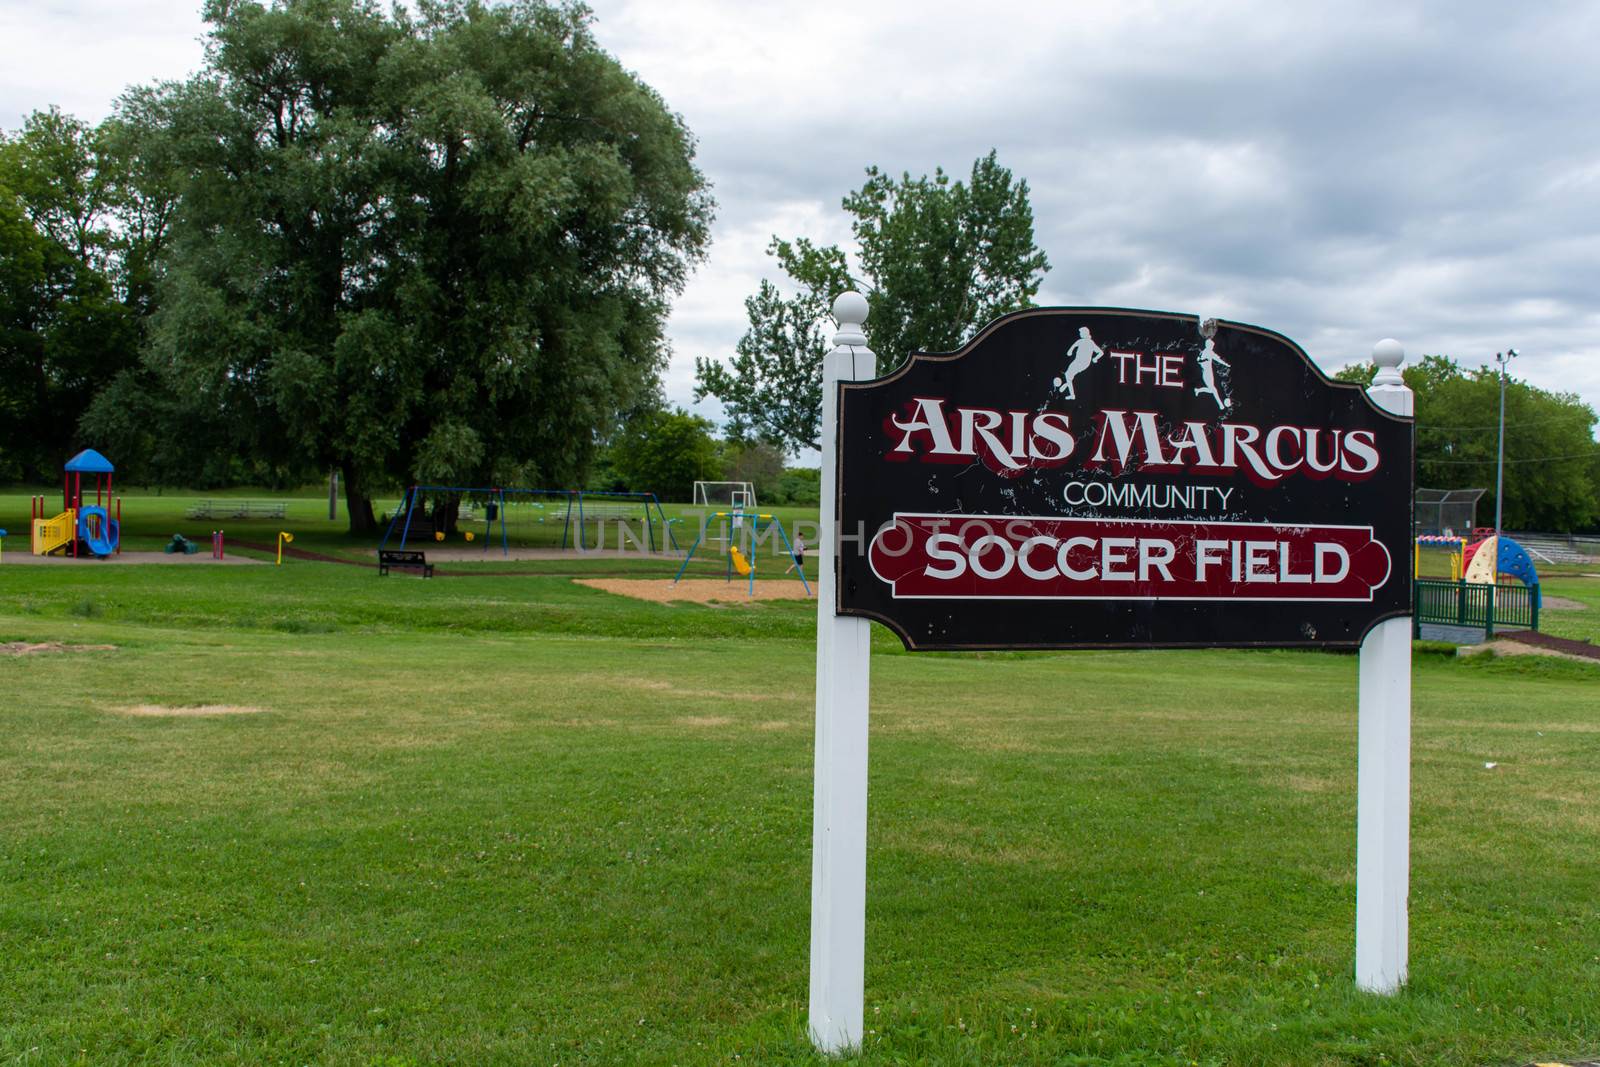 "Brighton, Ontario/Canada - 07/22/2019: Aris Marcus community soccer field sign for park in a small town Canadian city of Brighton near Pesquile Lake Provincial Park ."